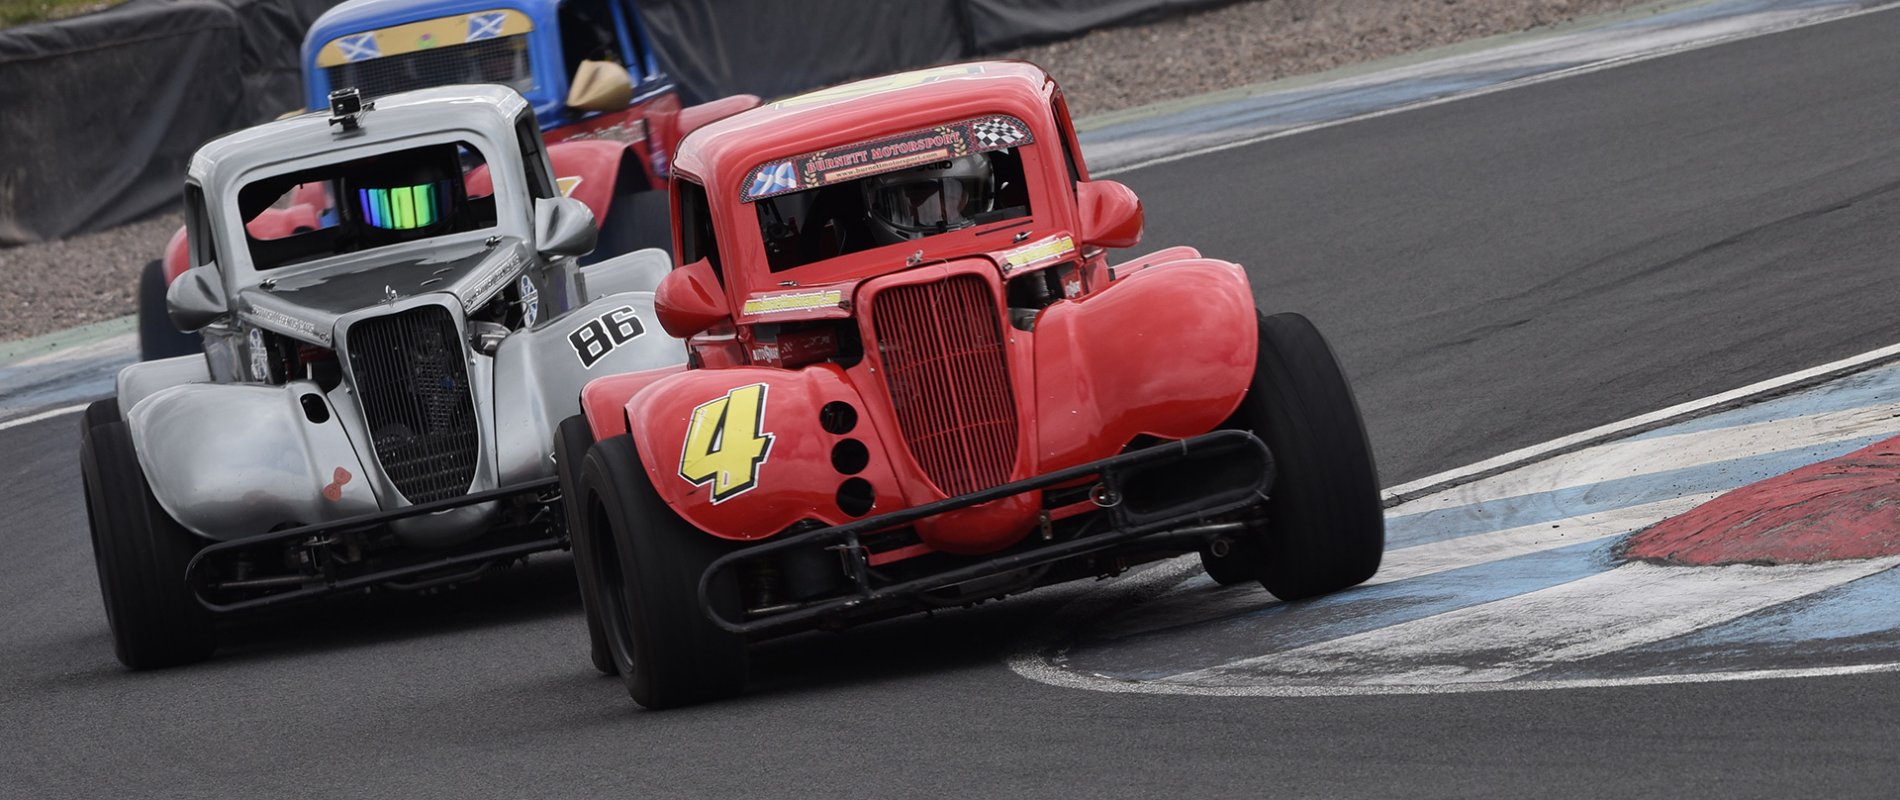 Scottish Championship Car Racing  featuring the David Leslie Trophy